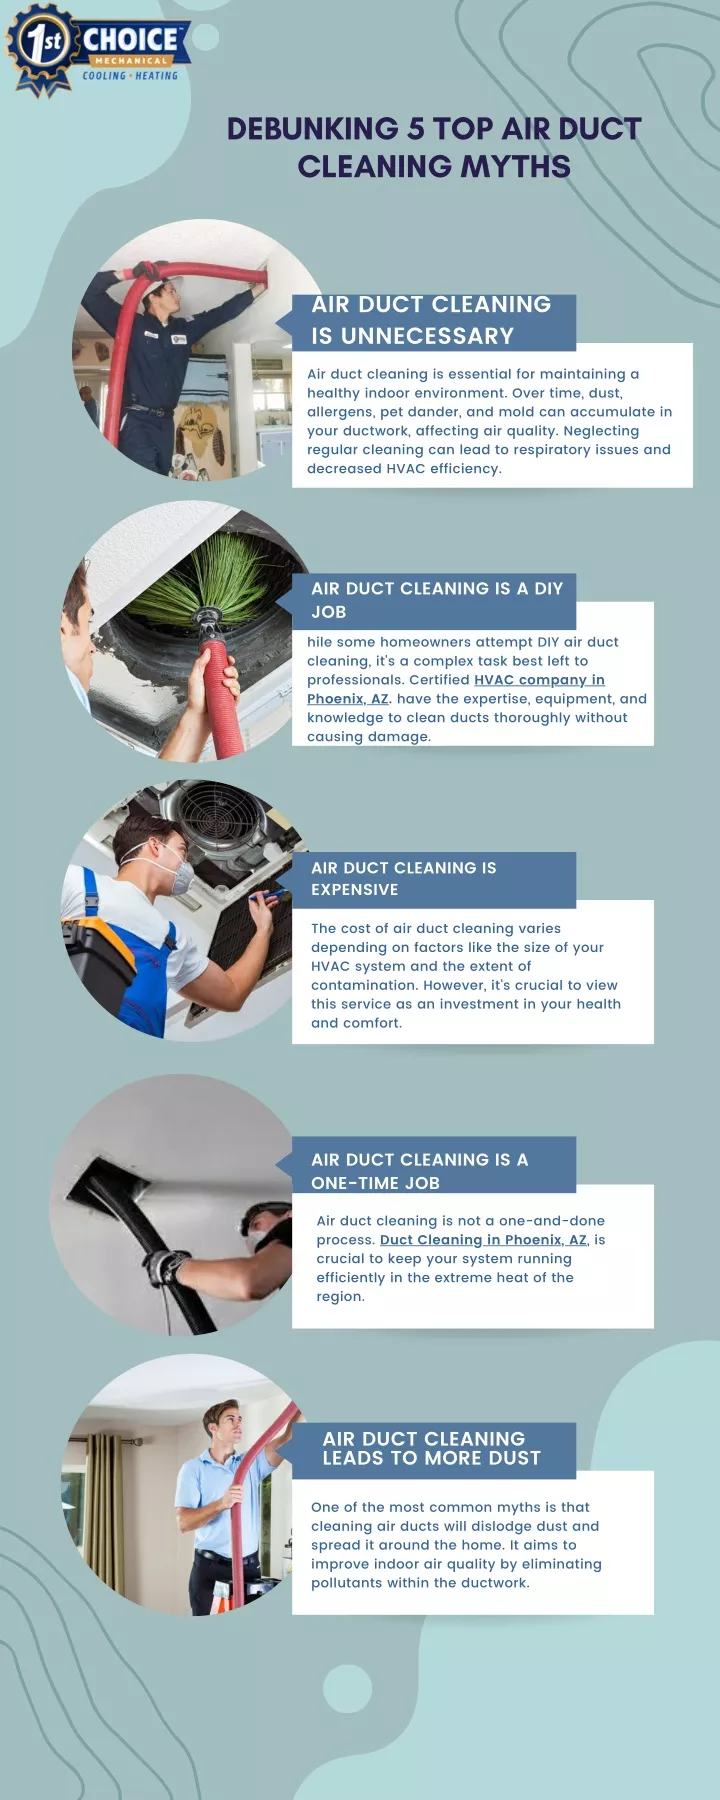 debunking 5 top air duct cleaning myths